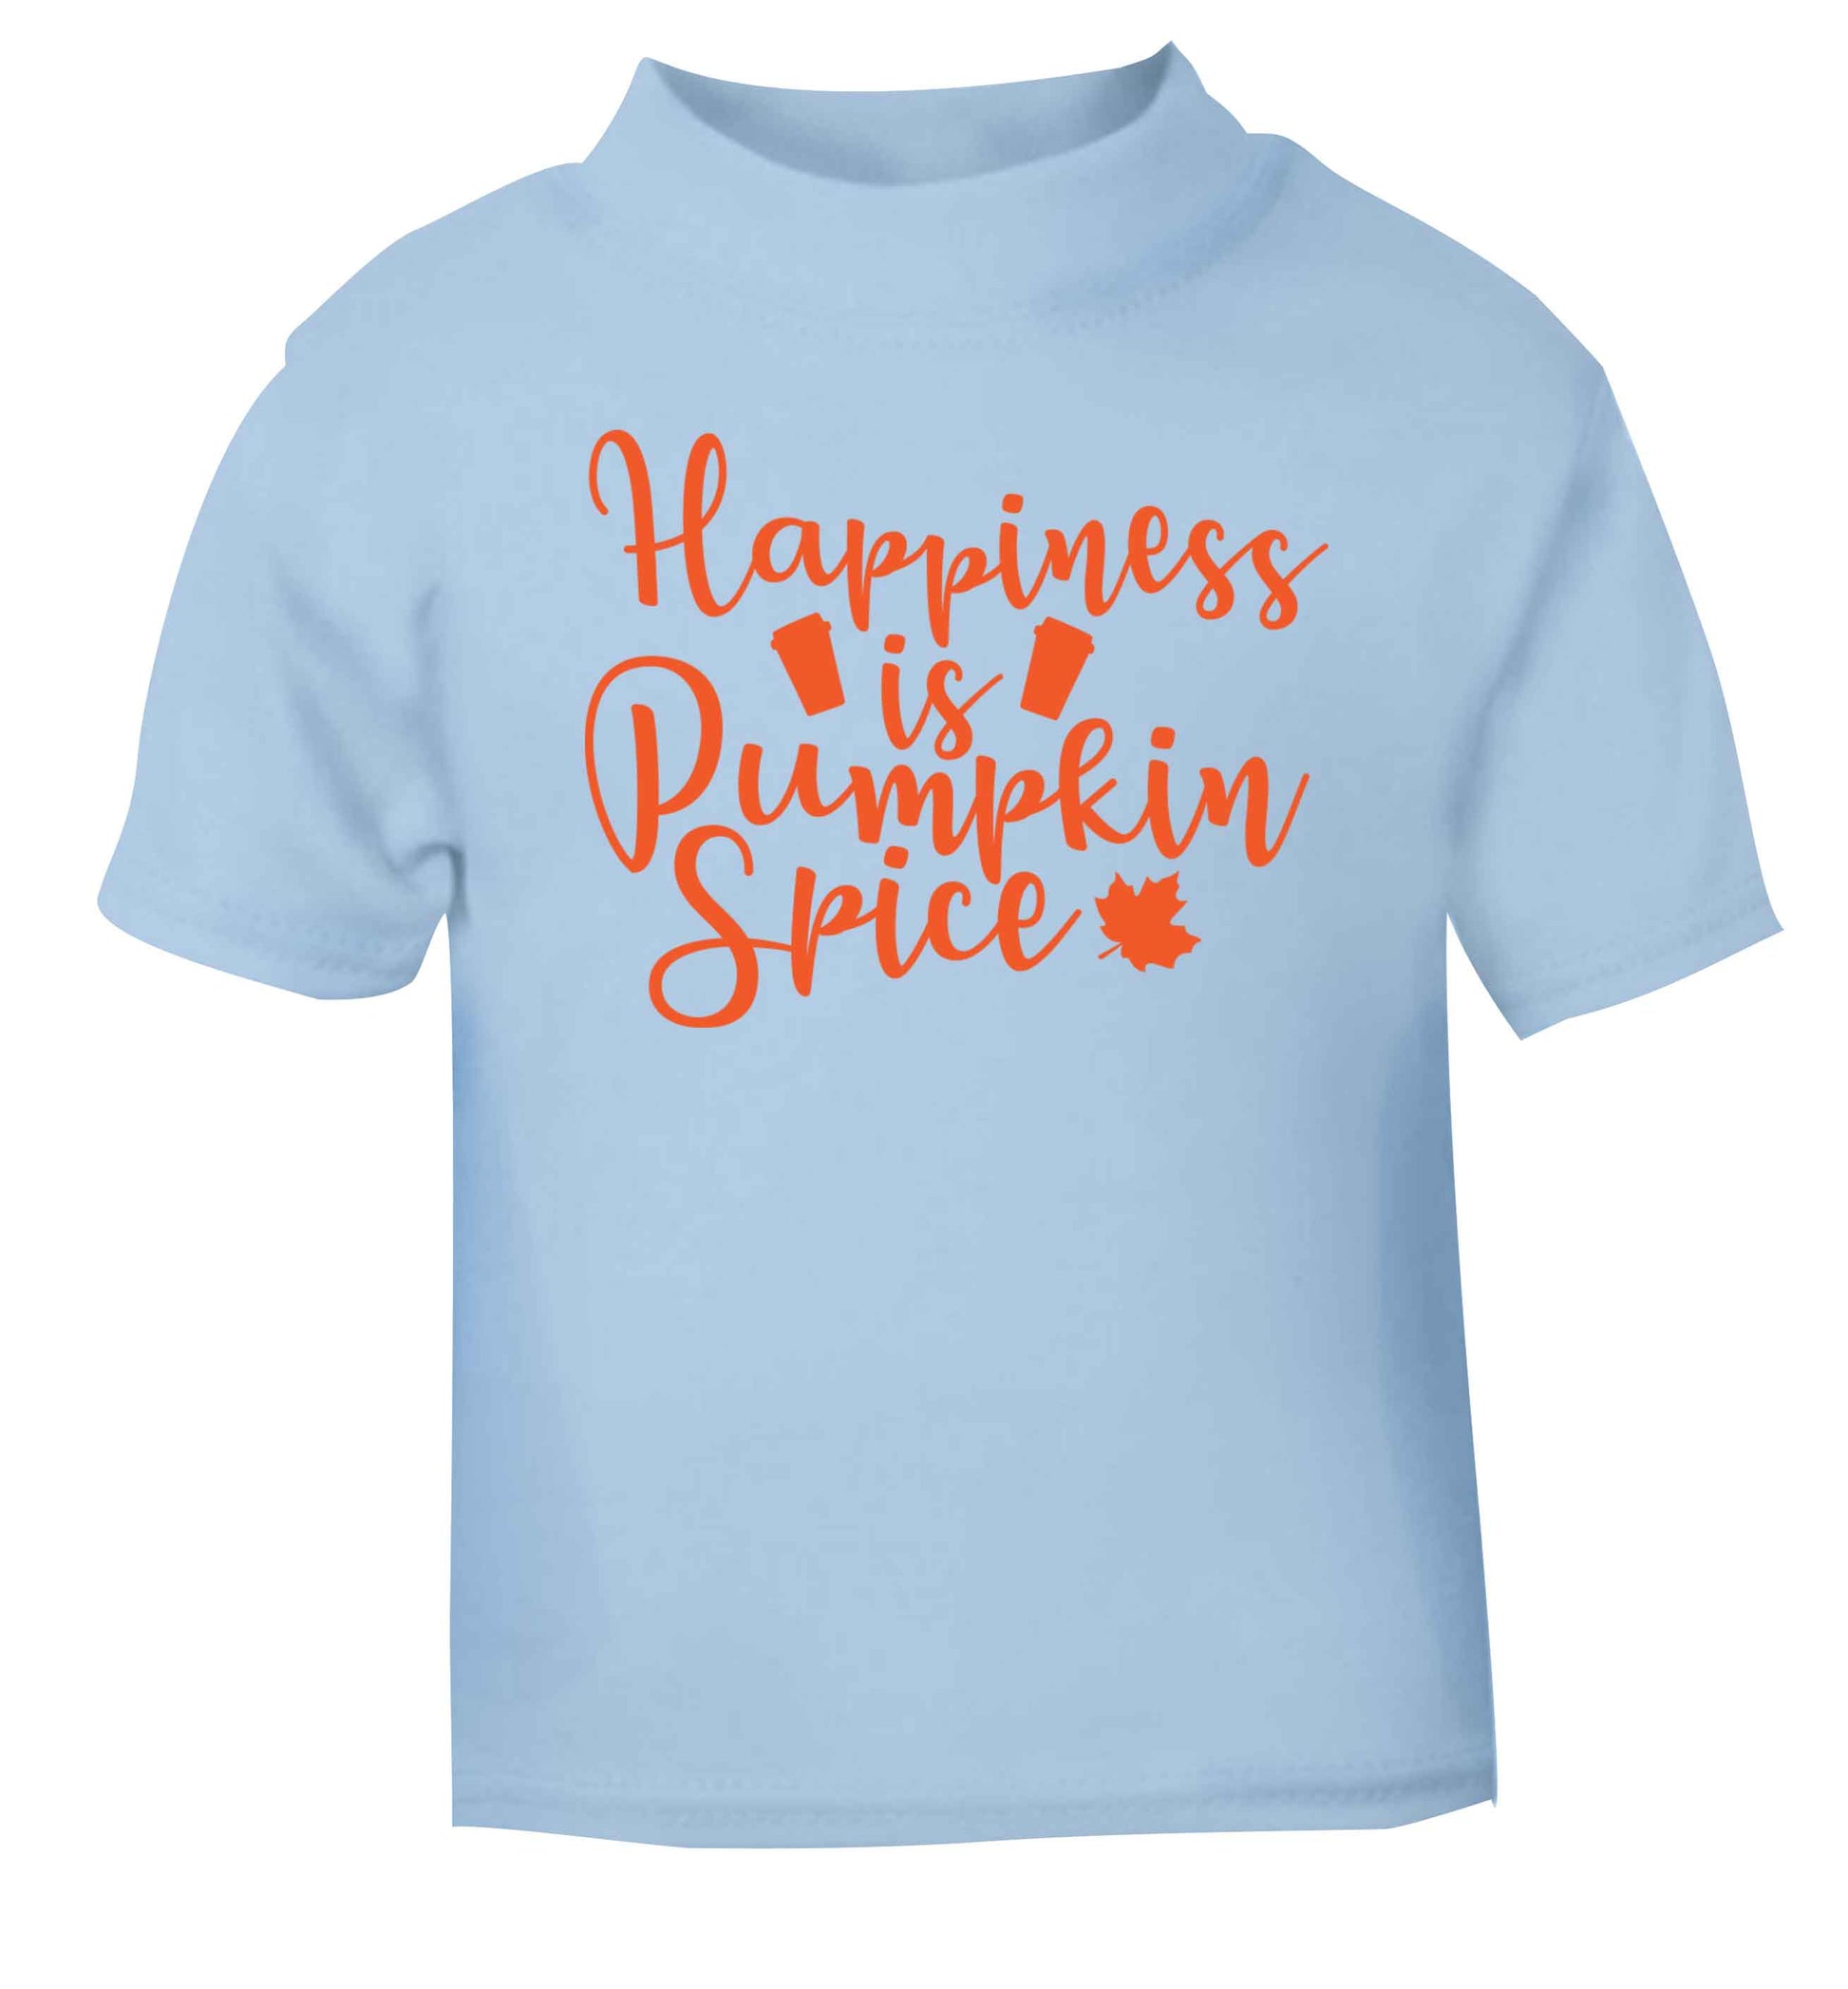 Happiness Pumpkin Spice light blue baby toddler Tshirt 2 Years